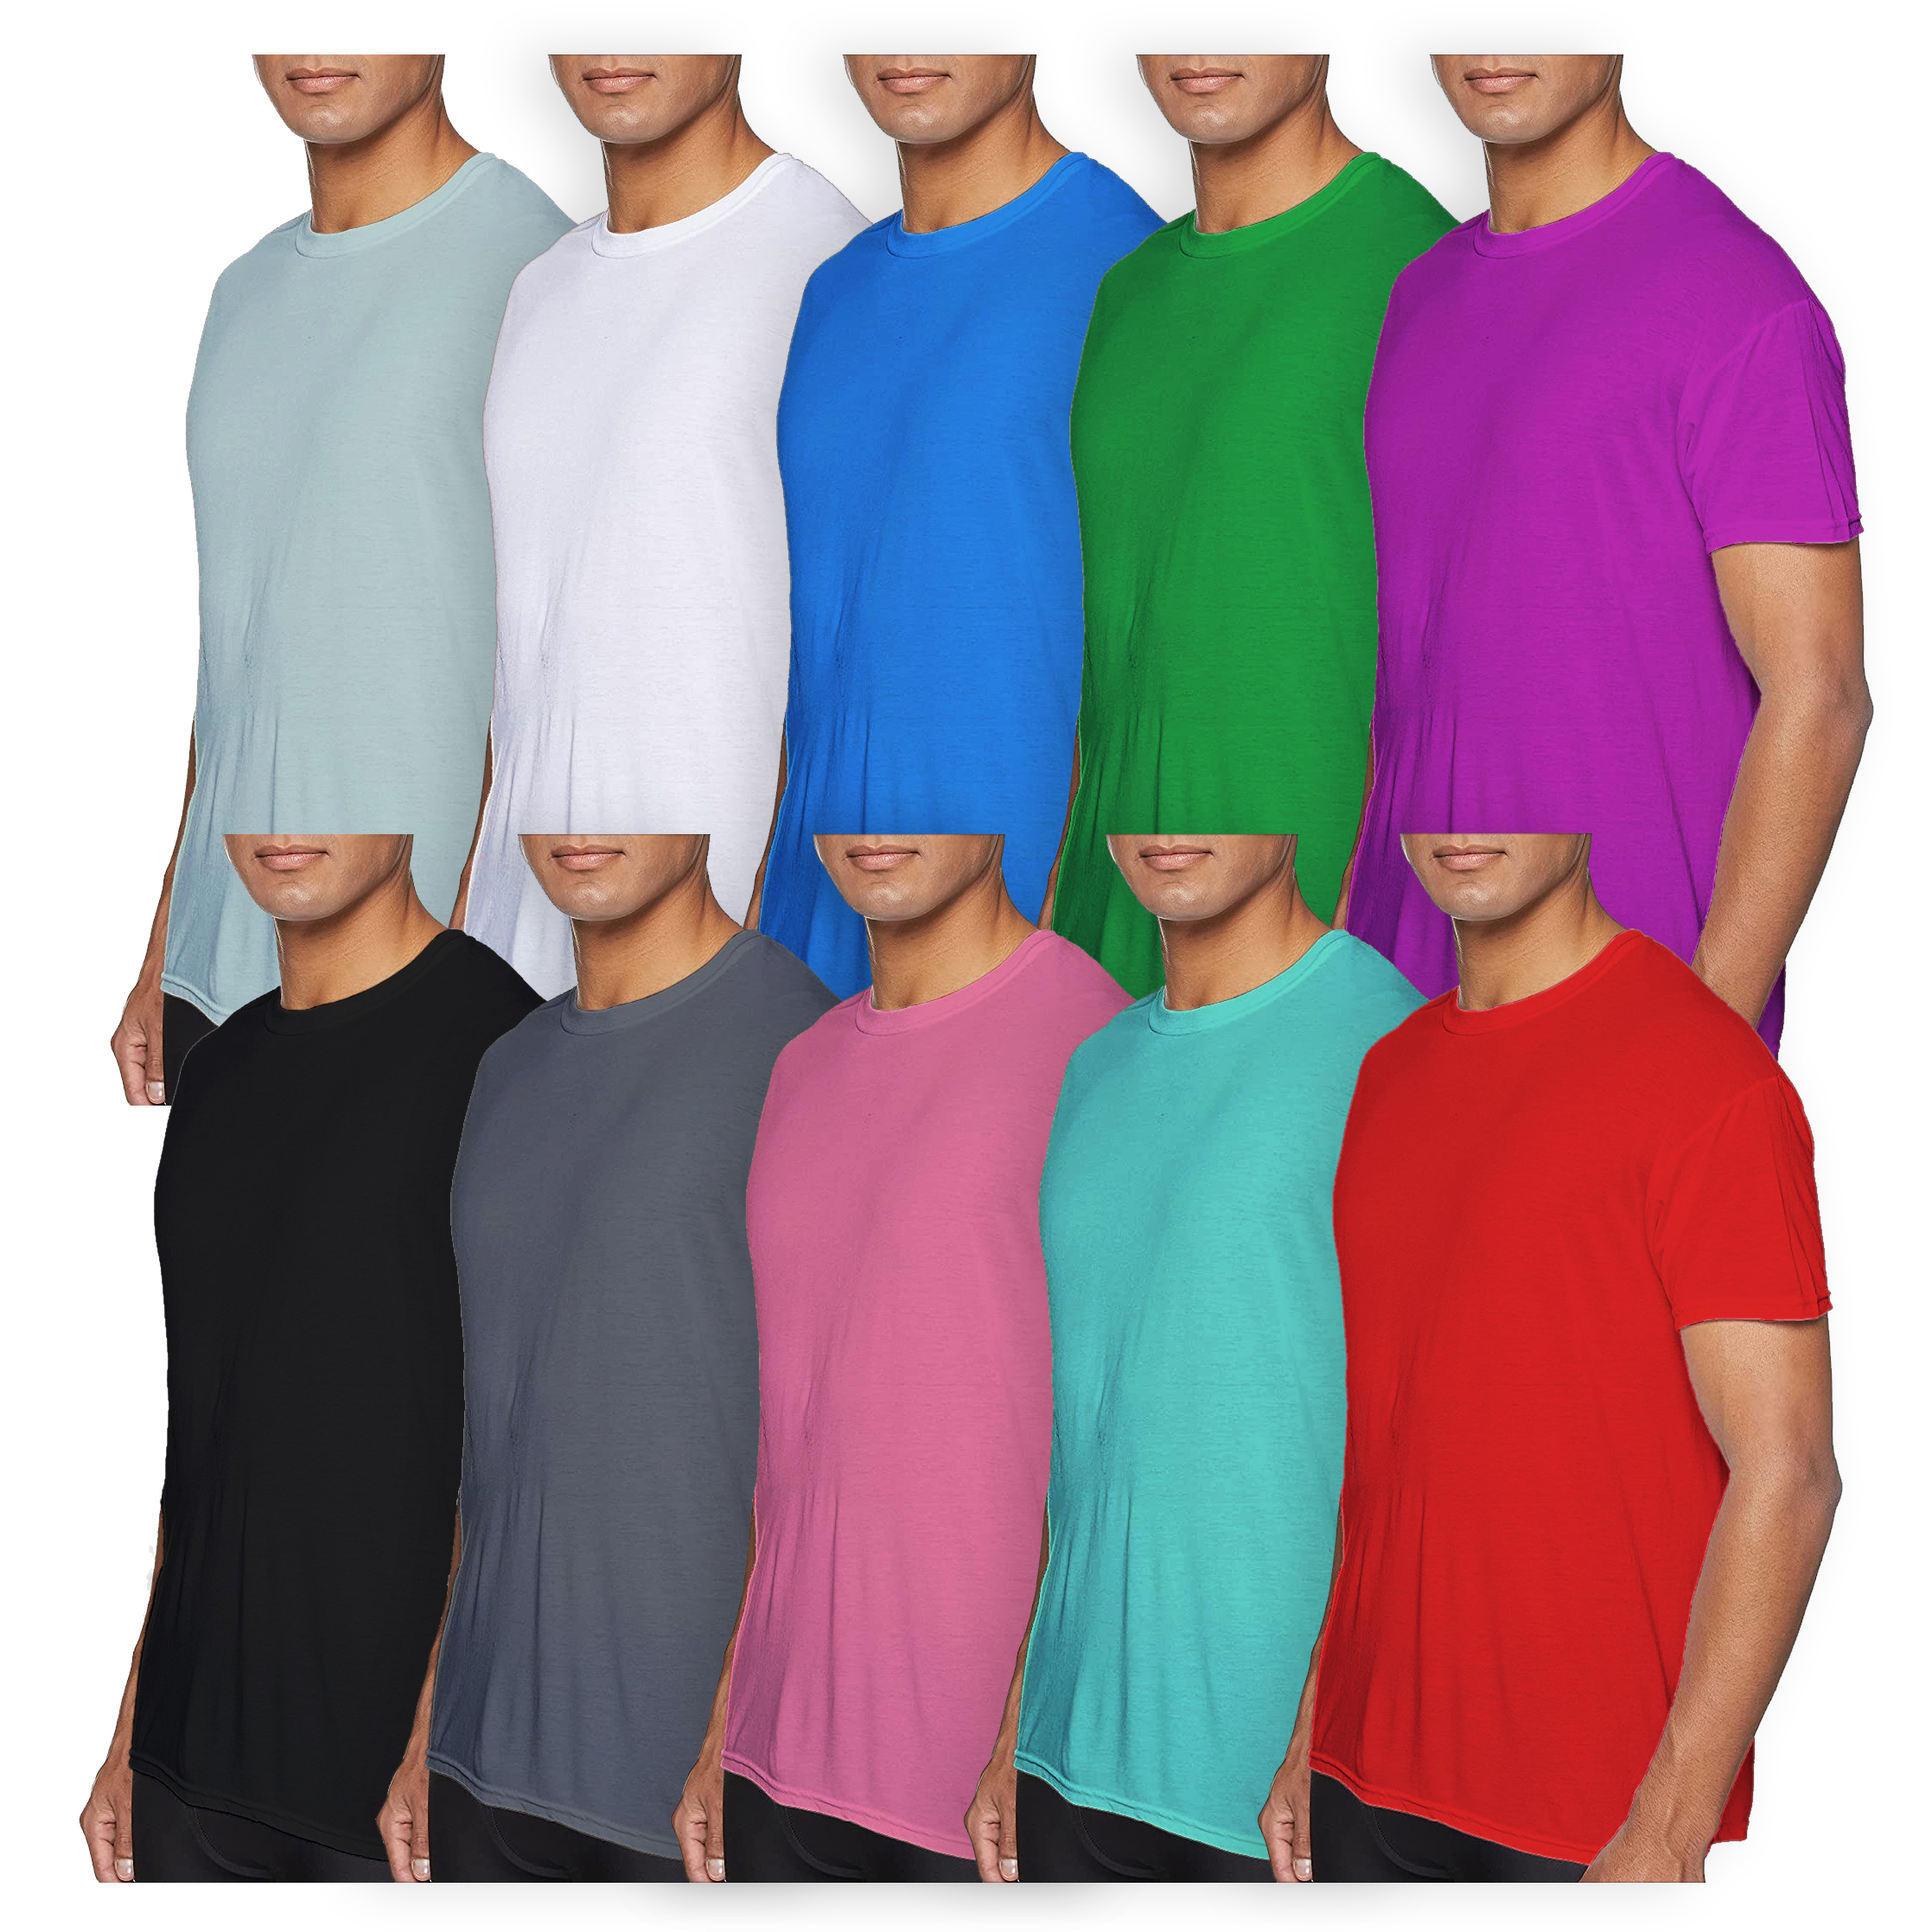 4-Pack: Men's Laviva Active Moisture Wicking Dry Fit Crew Neck Shirts - M